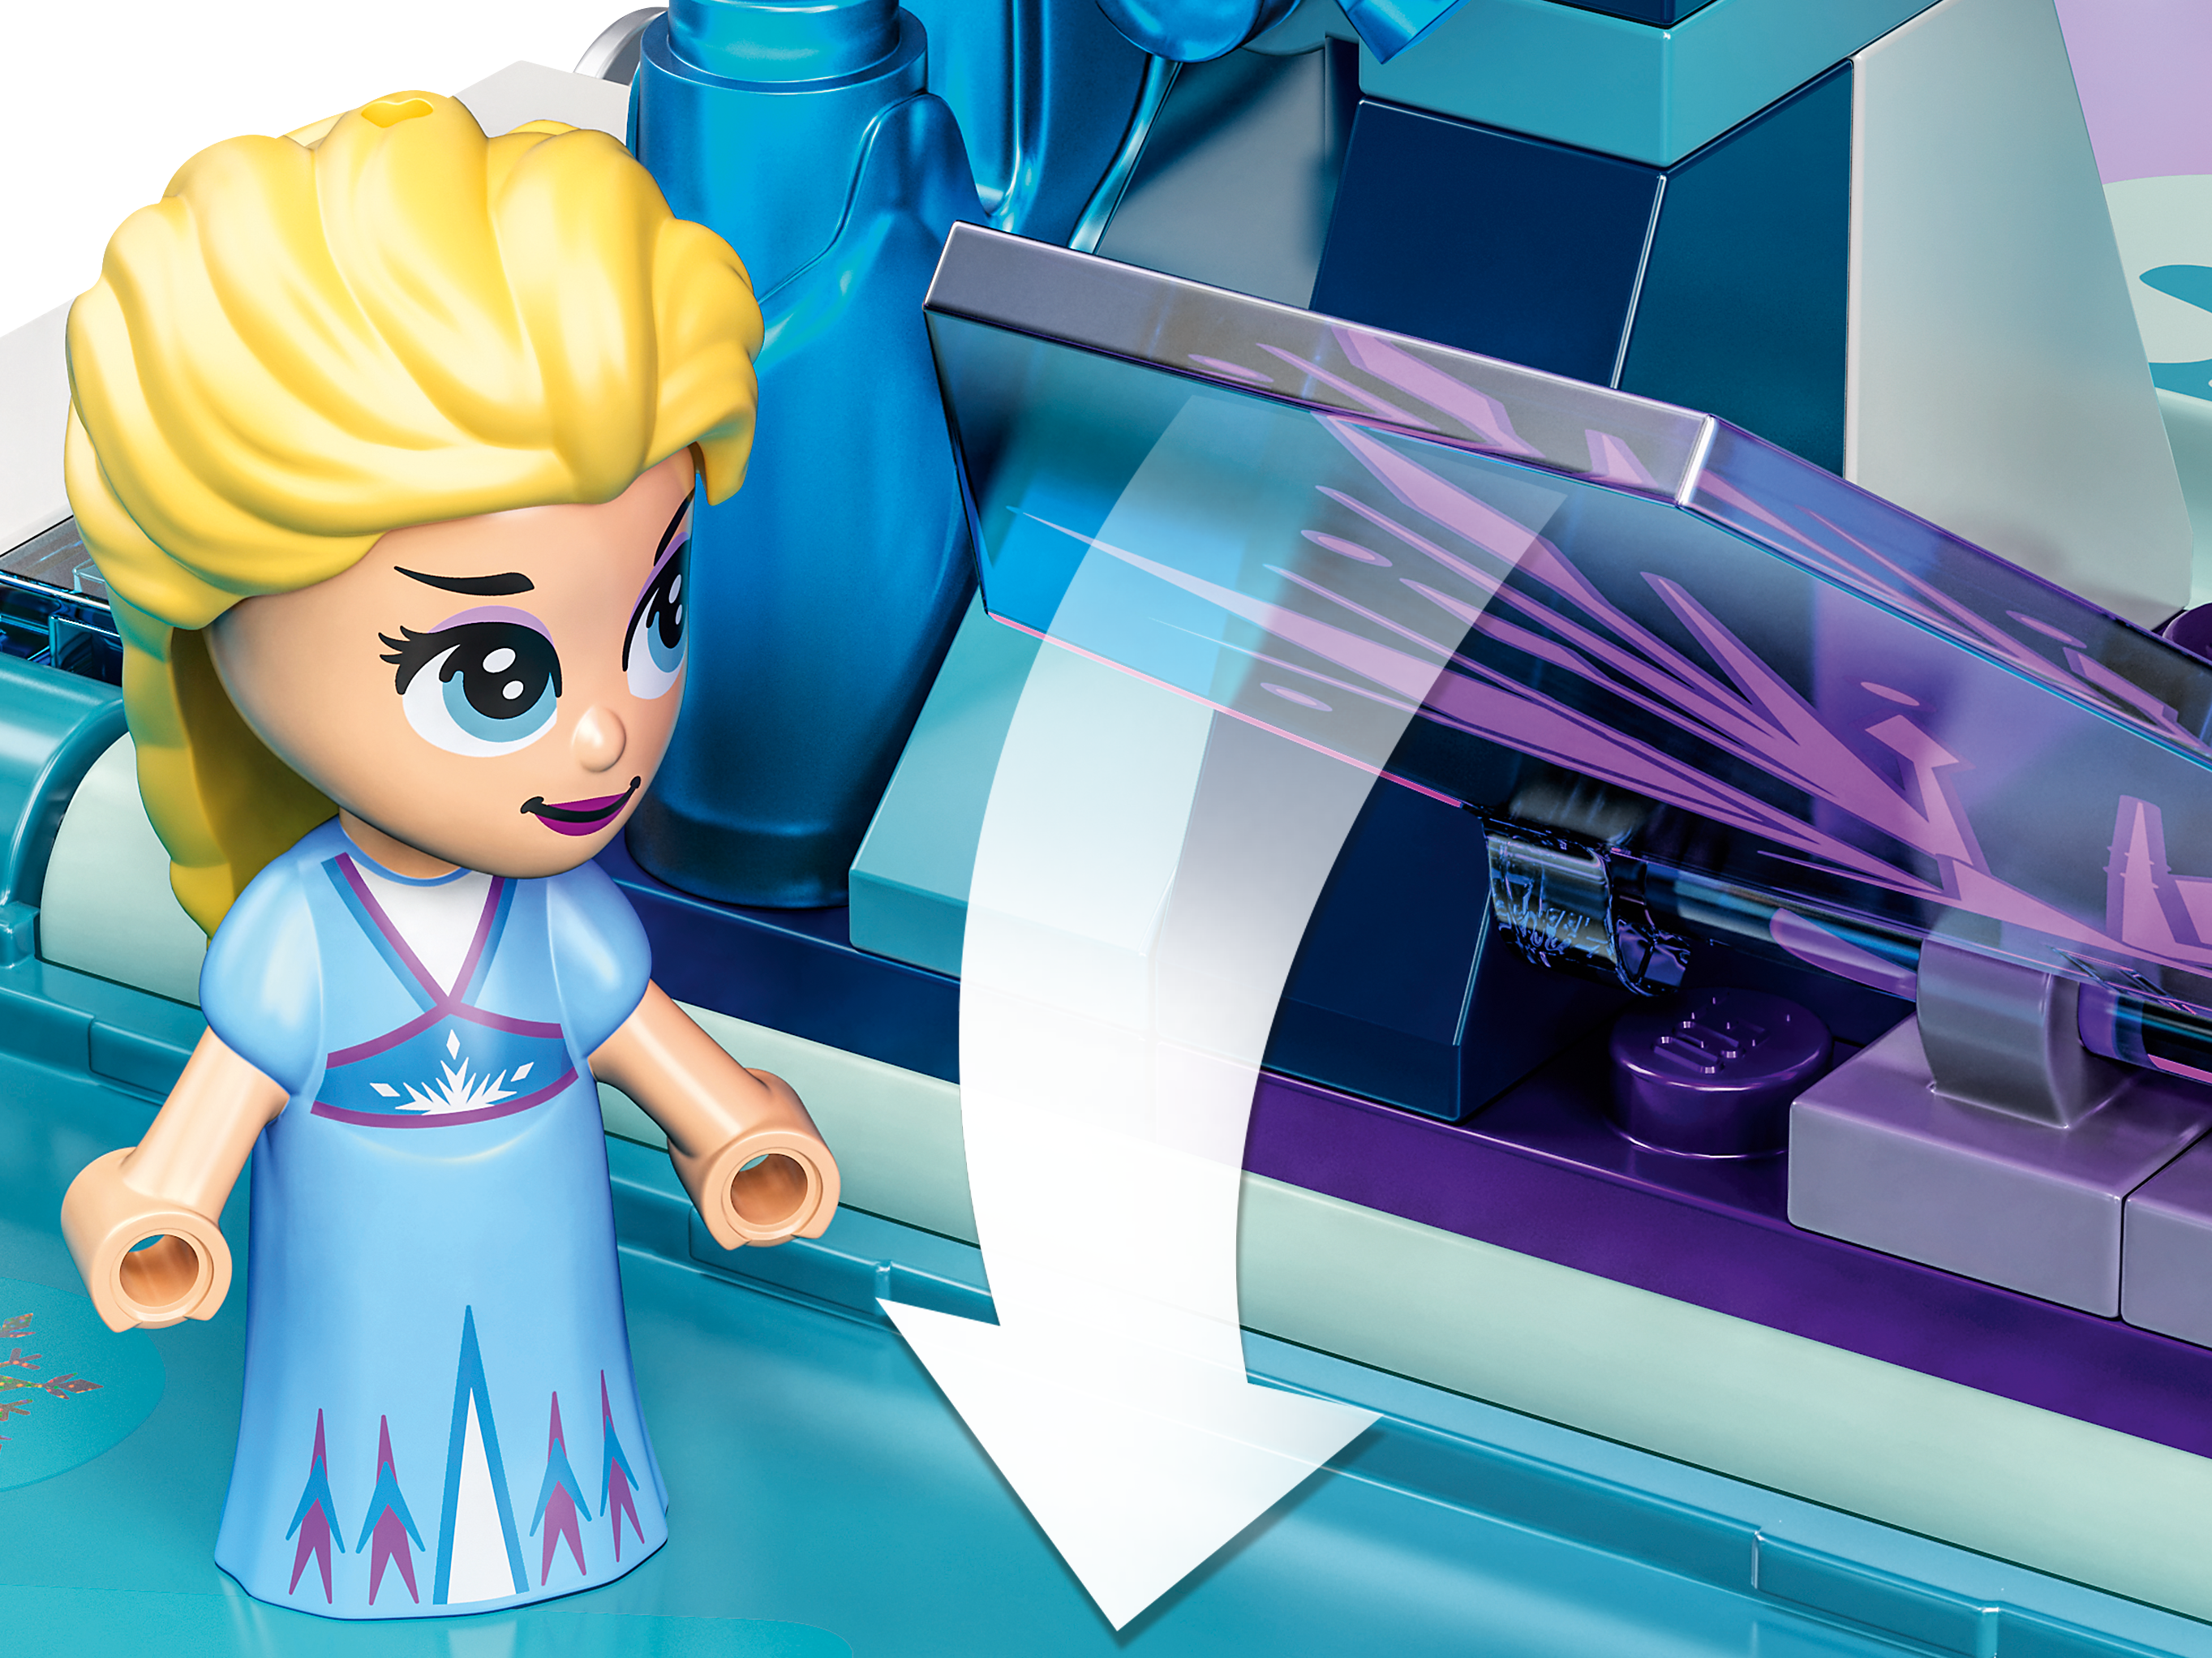 Elsa and the Nokk Storybook Adventures 43189 | Disney™ | Buy online at the  Official LEGO® Shop US